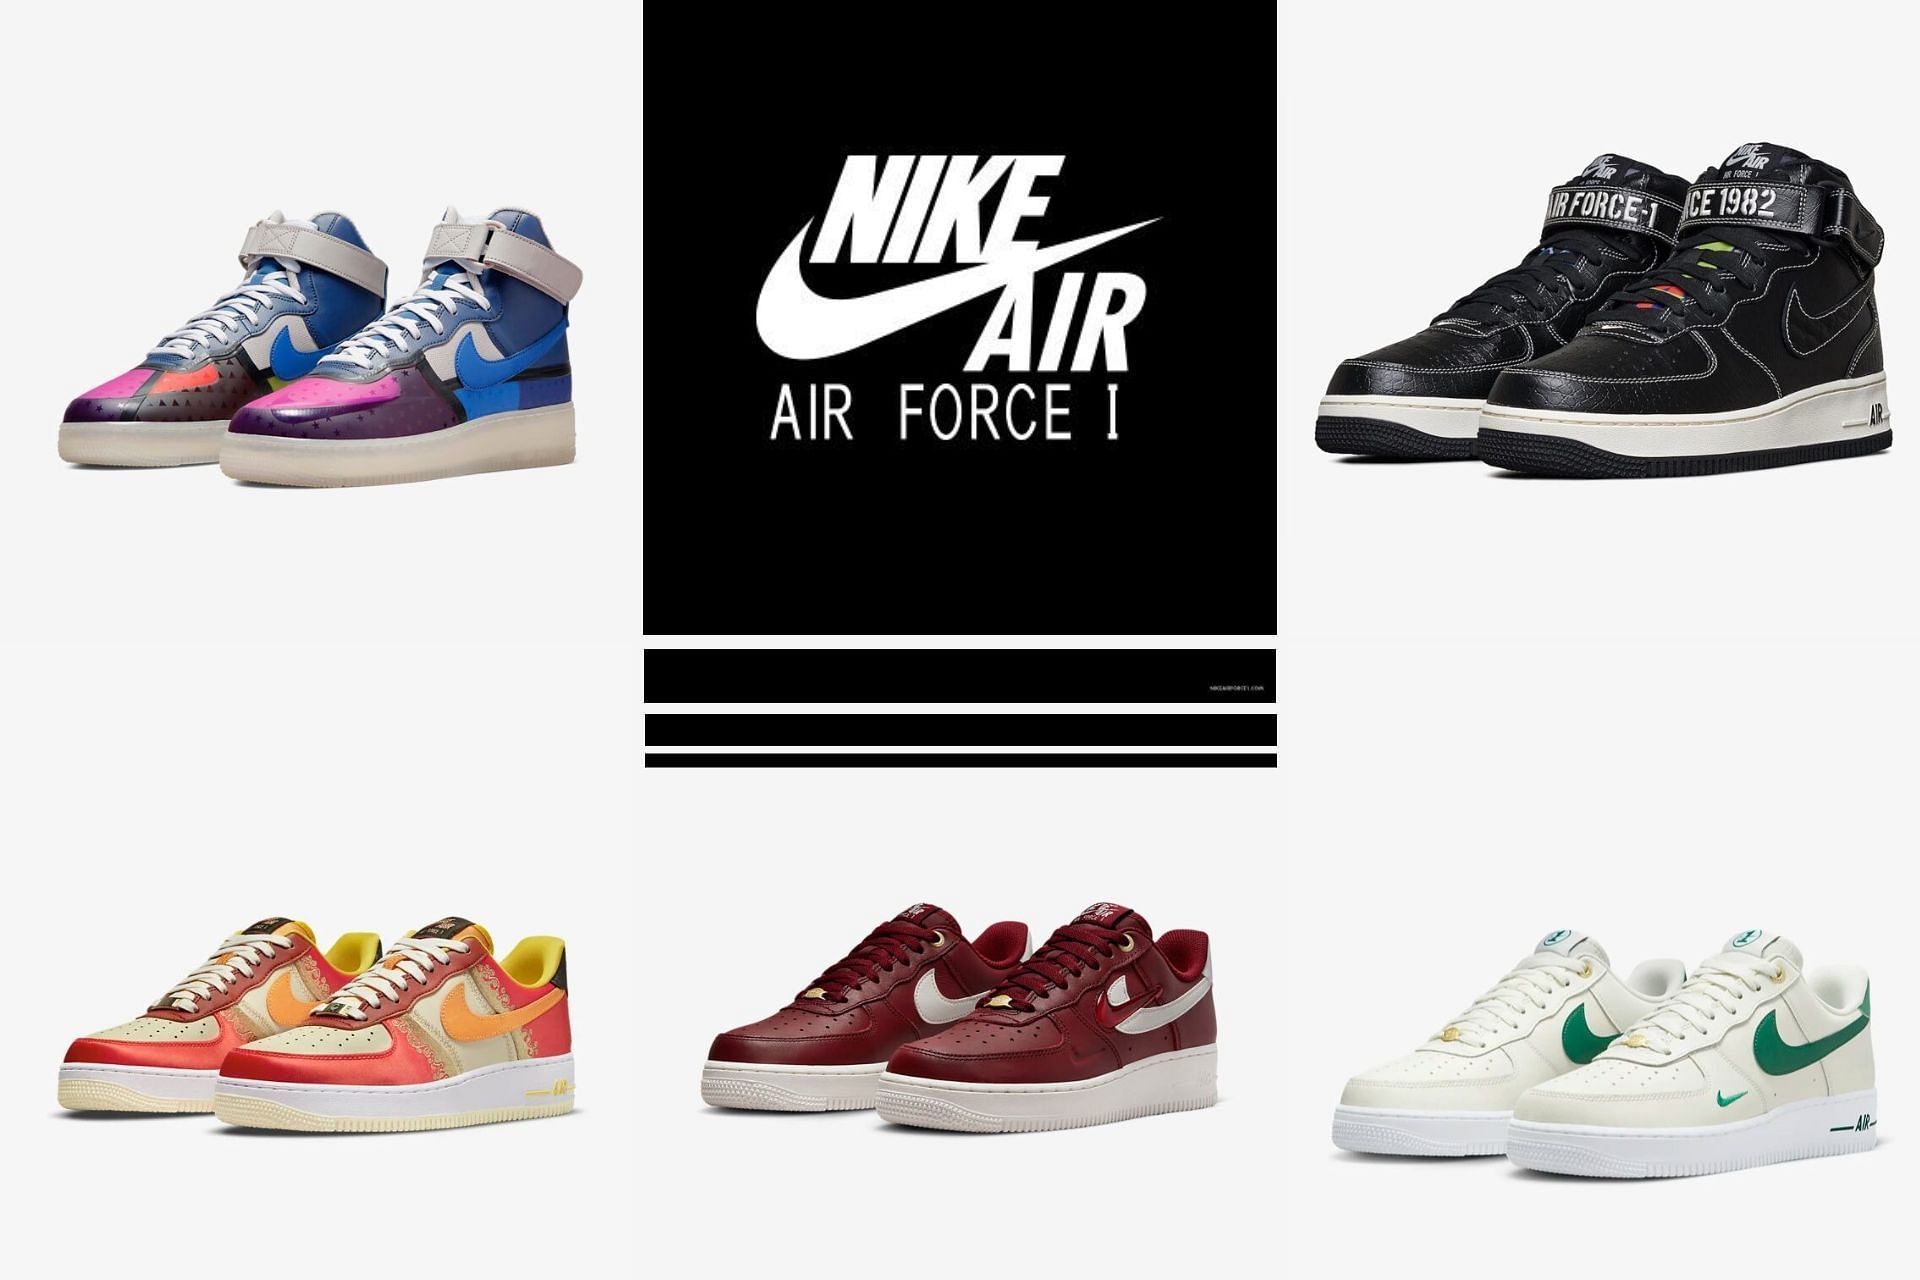 Best Nike Air Force 1 designs this year